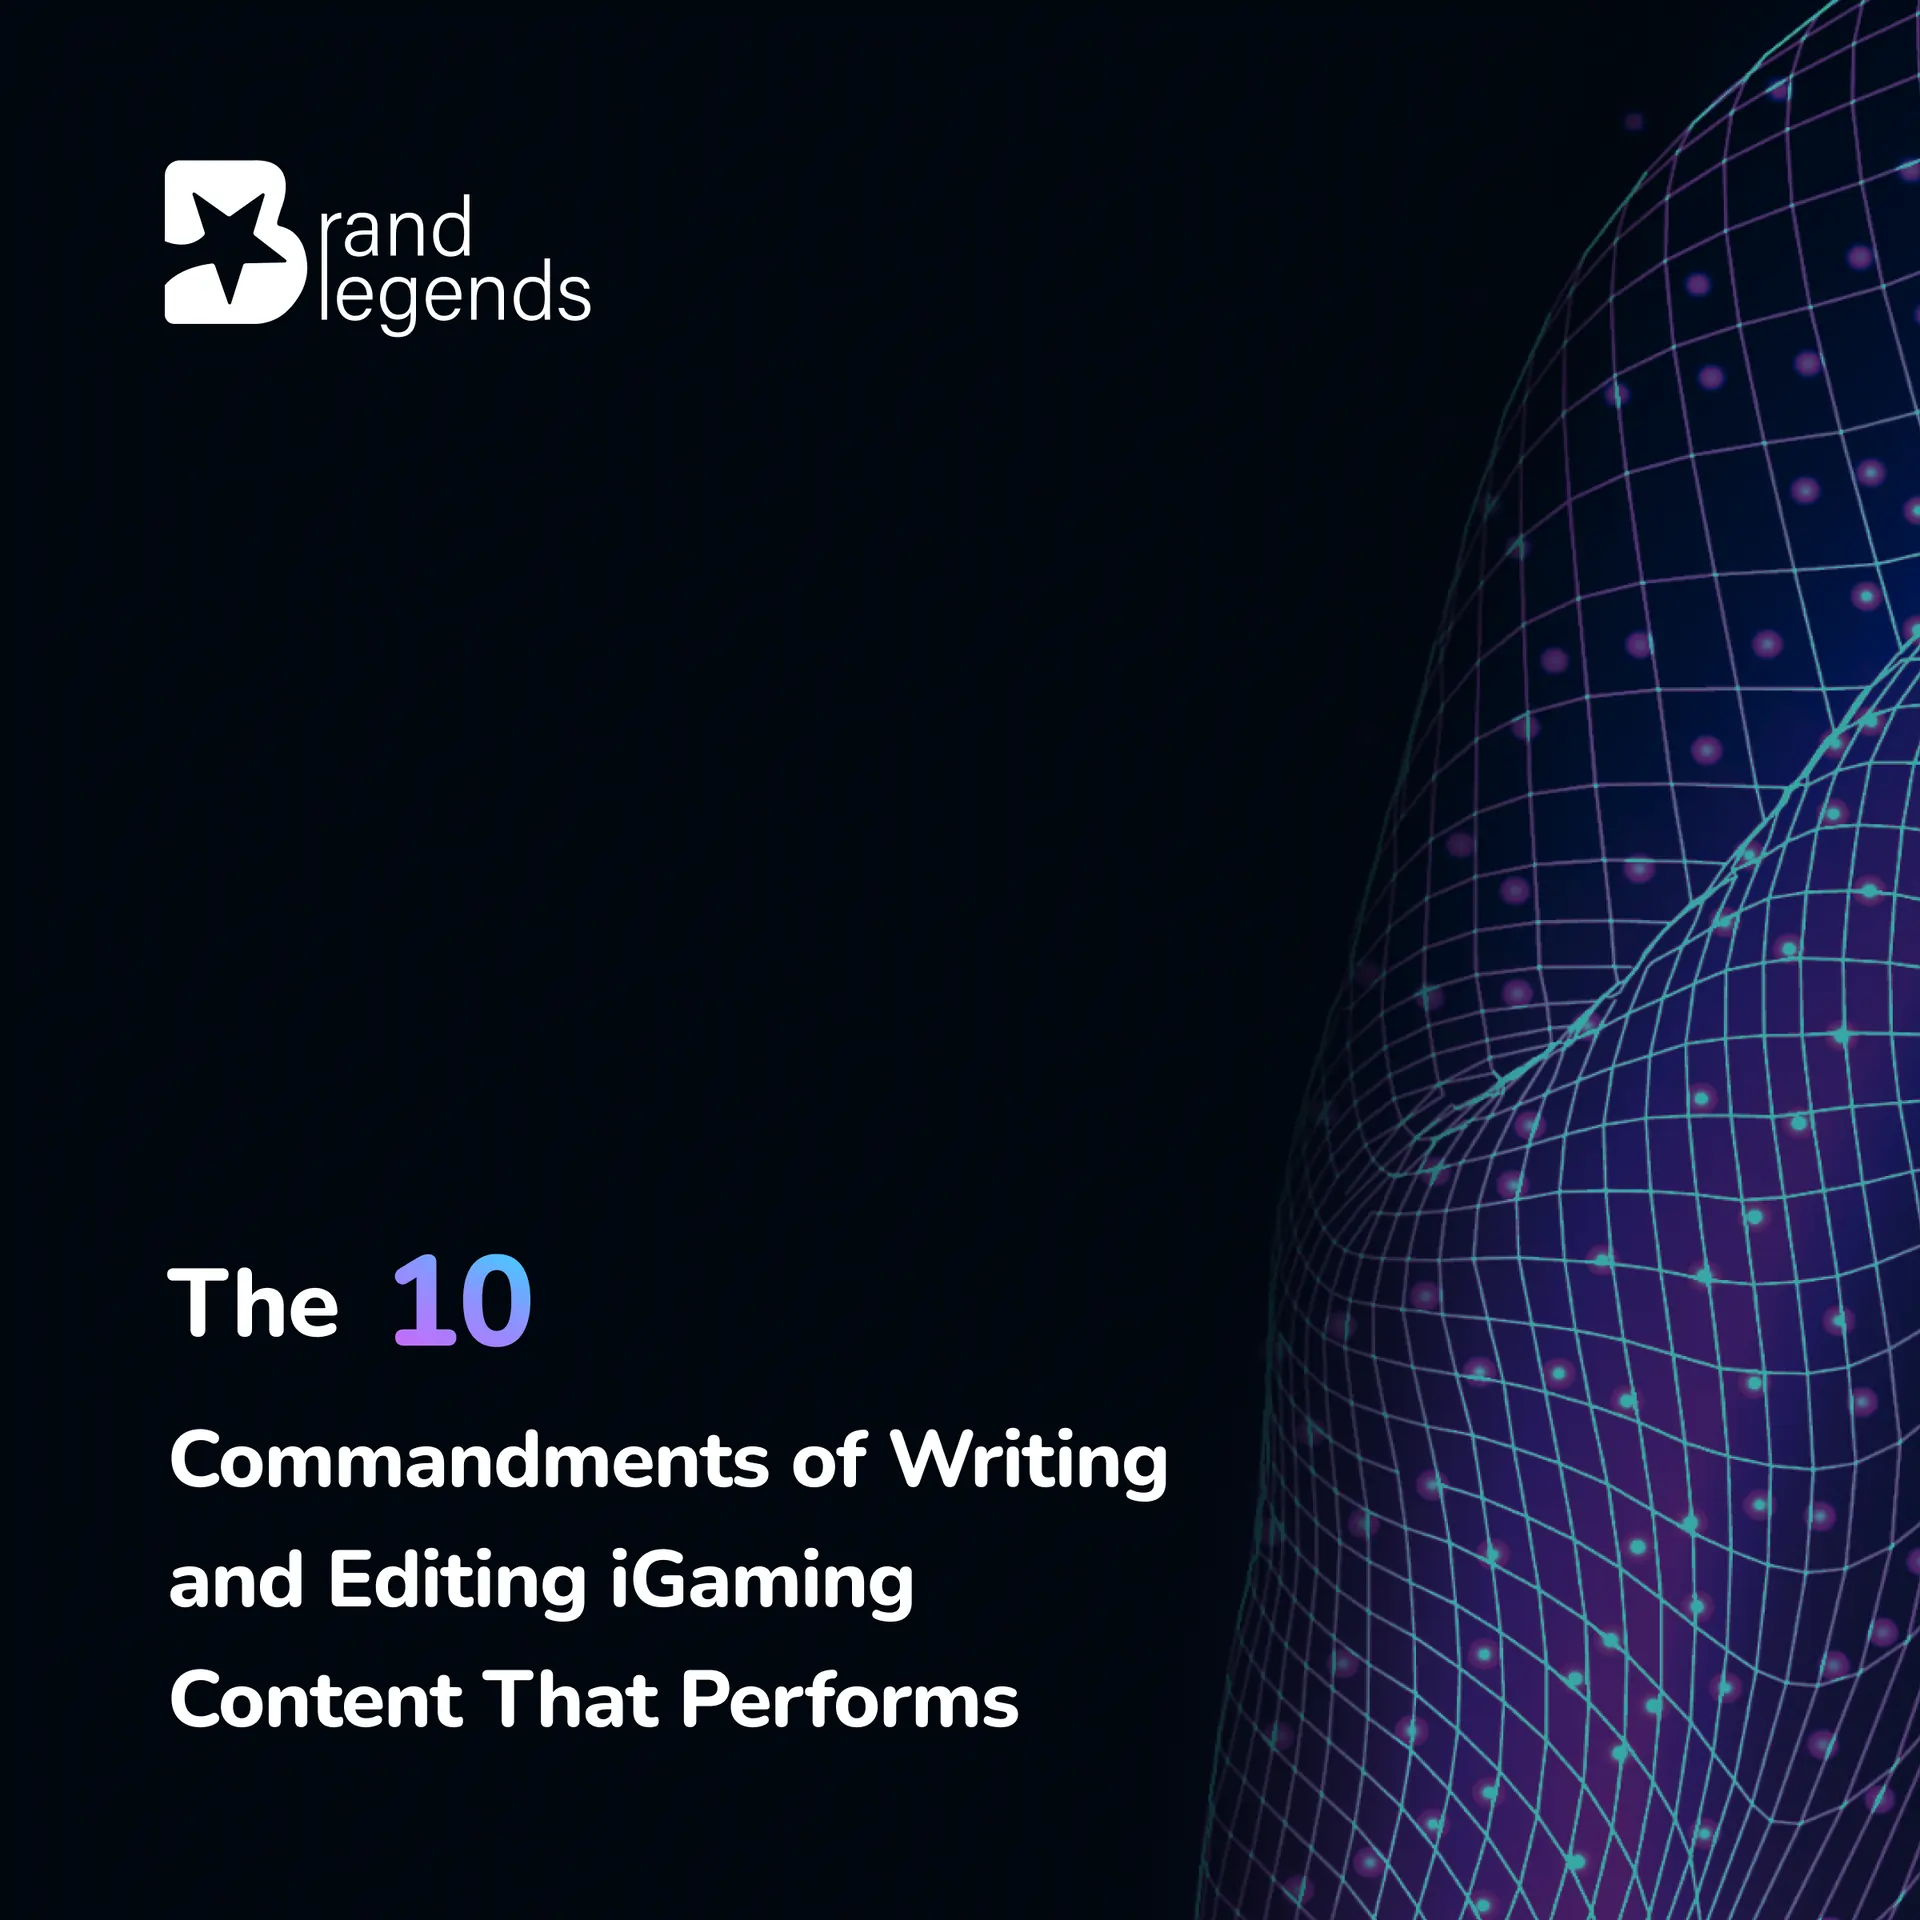 The 10 Commandments of Writing and Editing iGaming Content That Performs